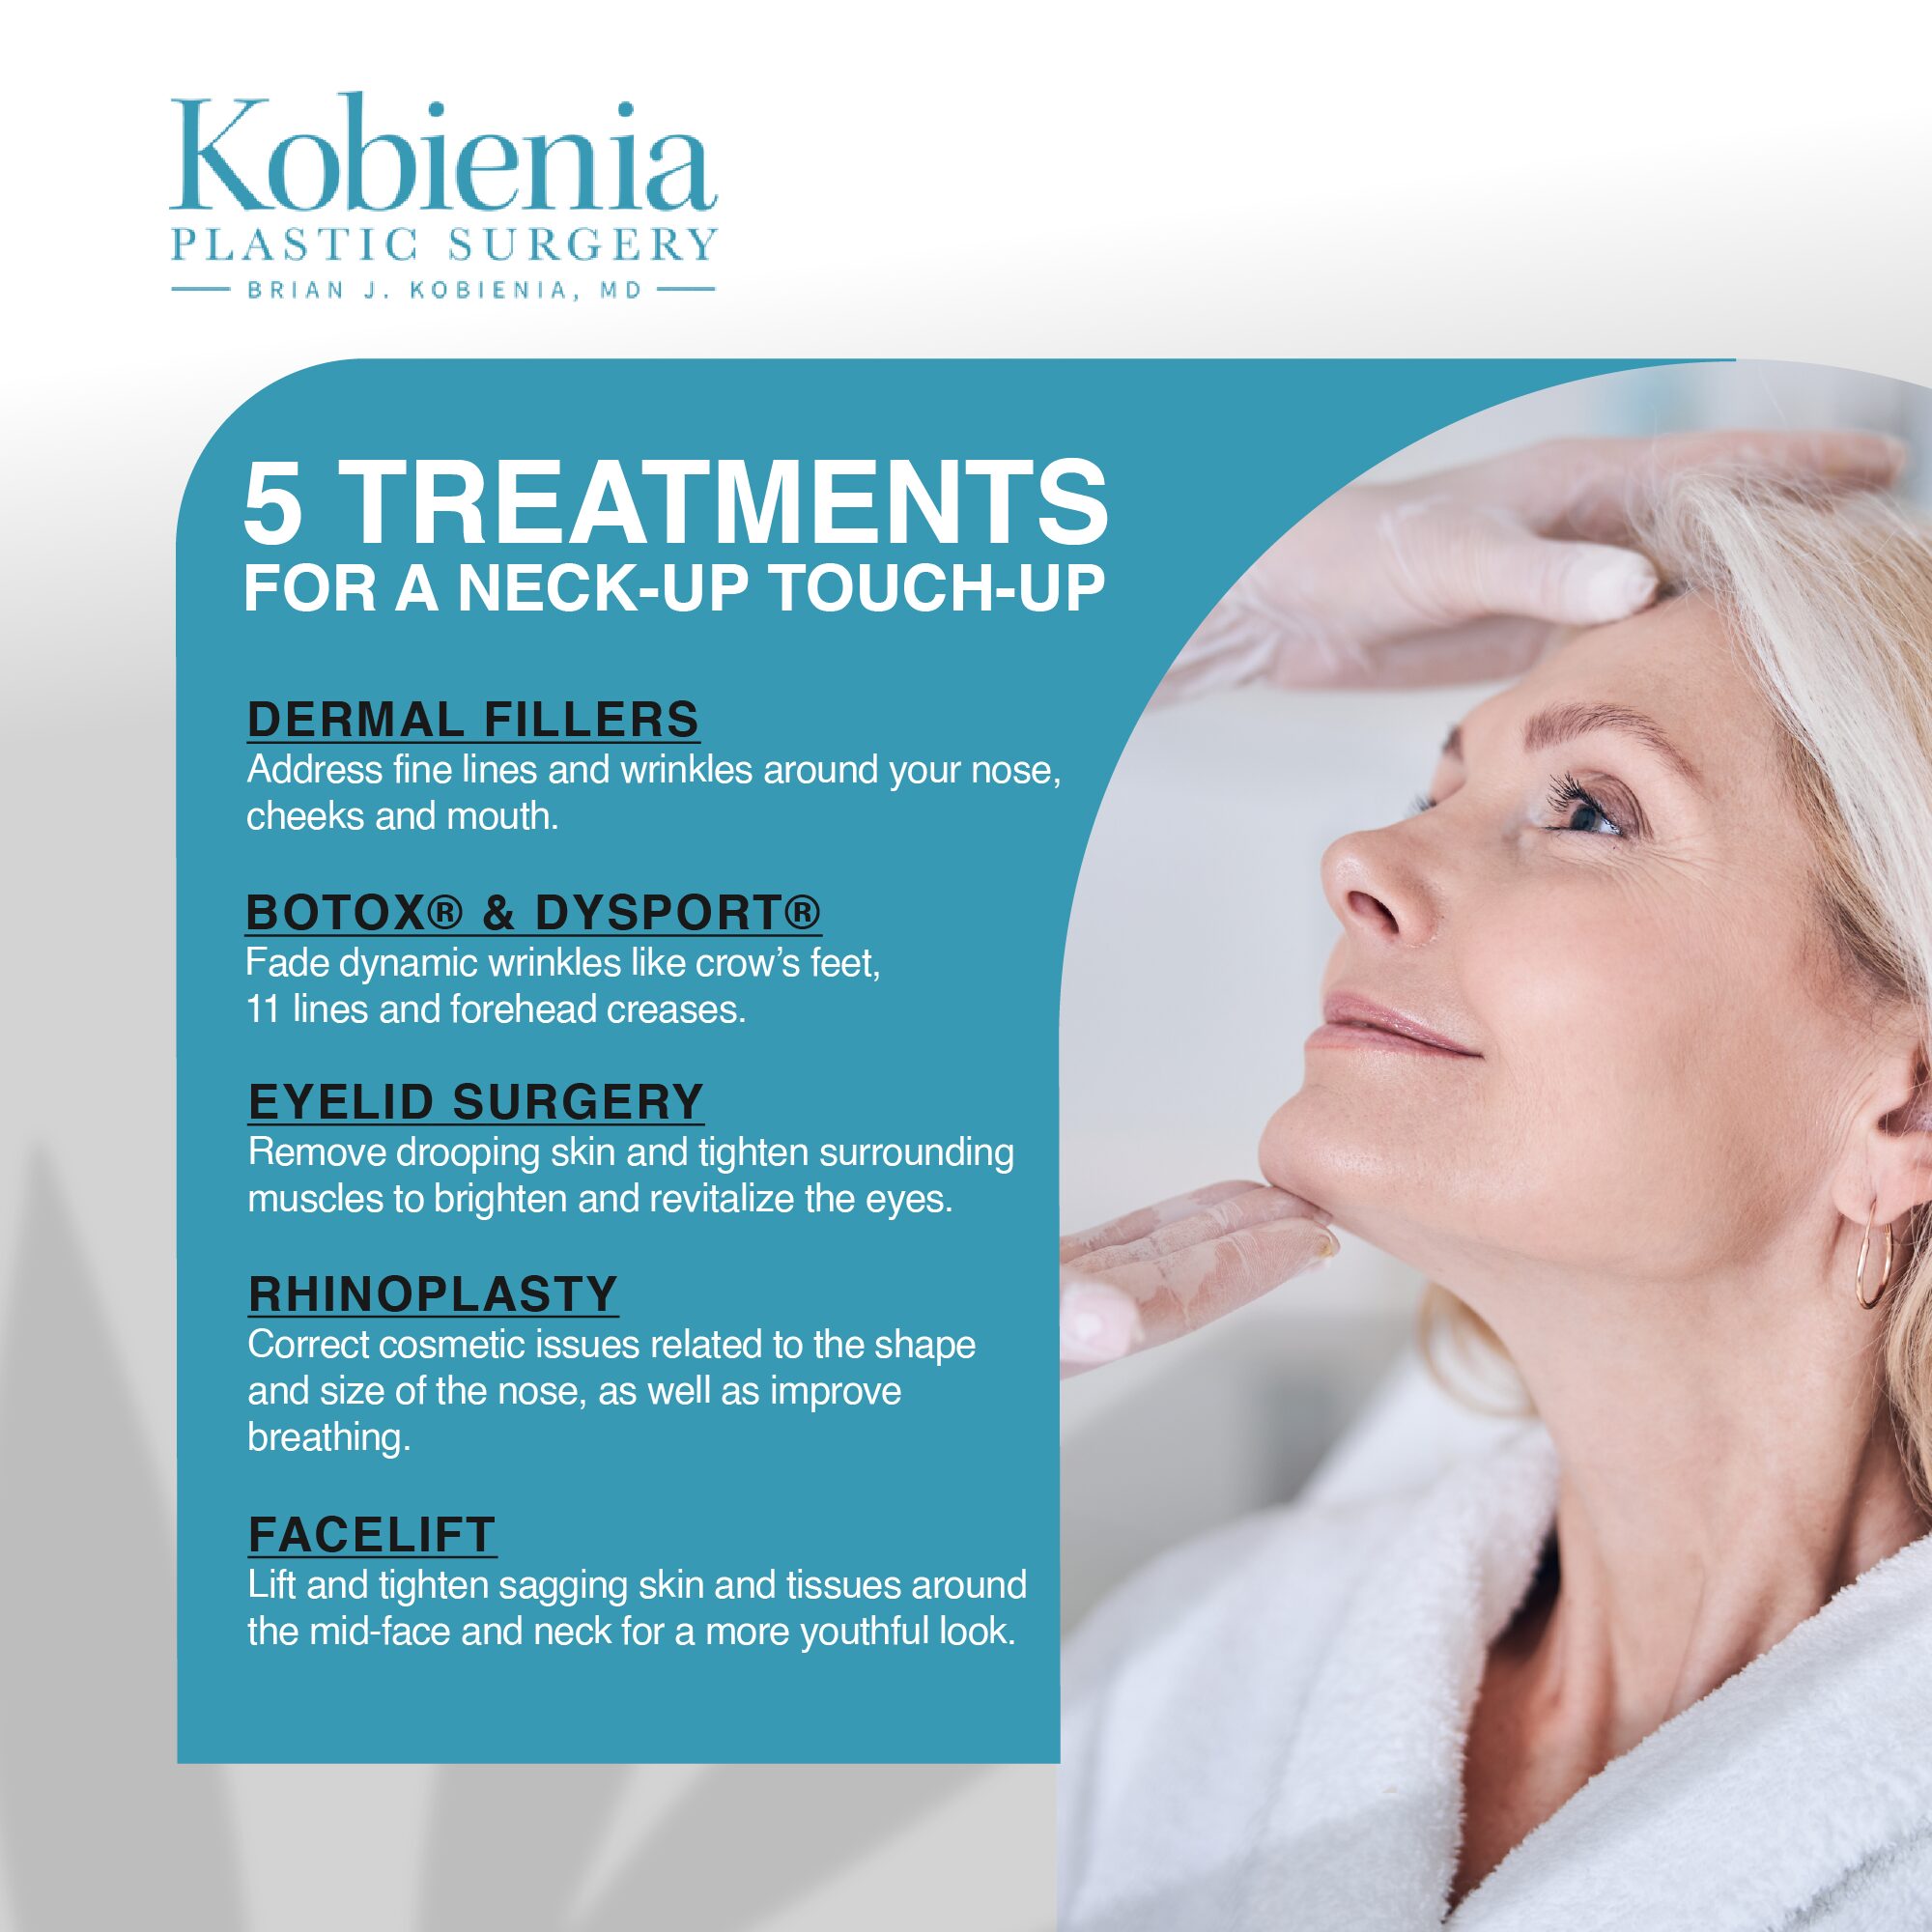 5 Treatments for a Neck-Up Touch-Up